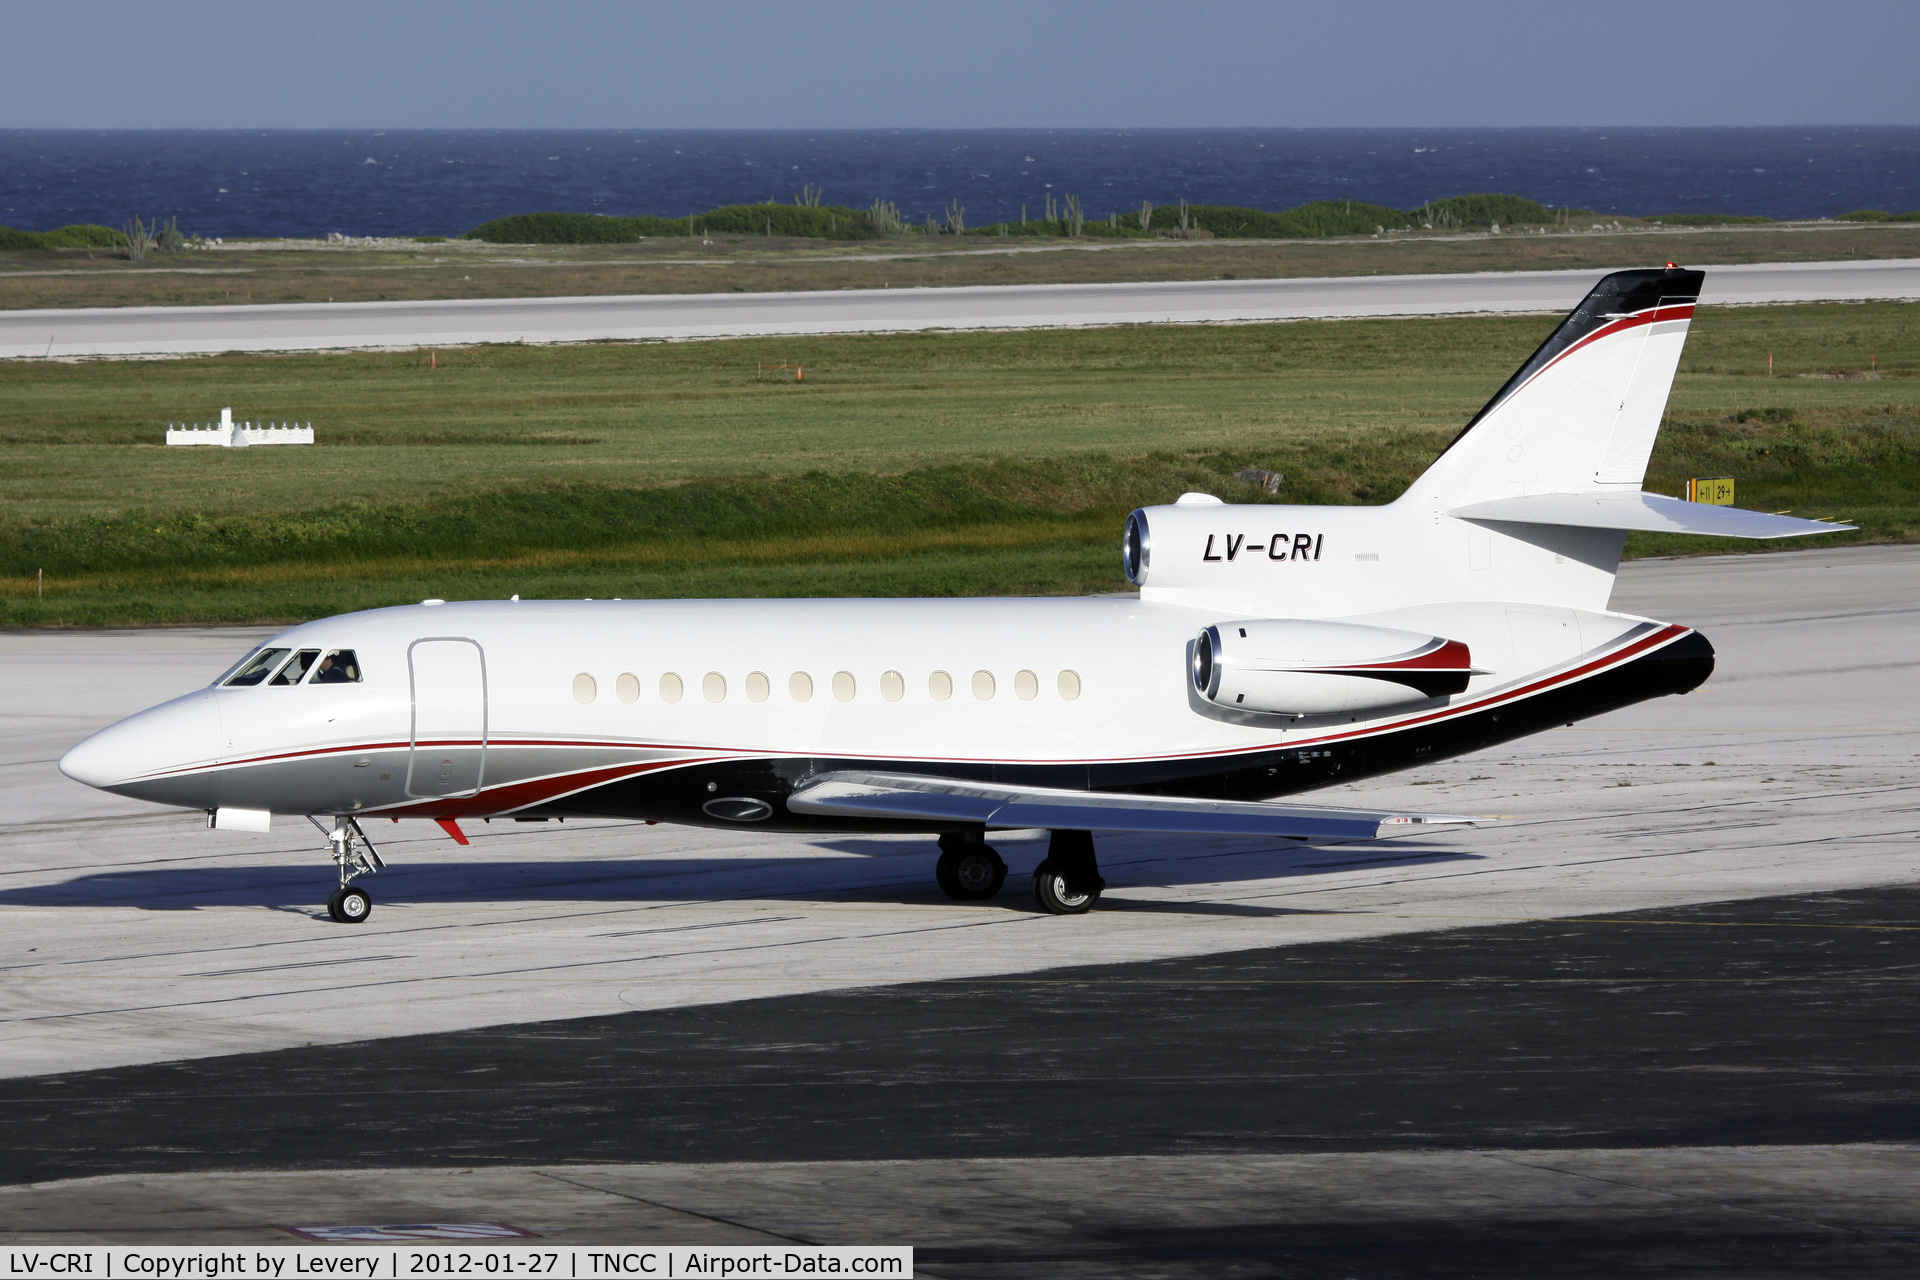 LV-CRI, 1988 Dassault Falcon 900 C/N 047, On there way home after a fuel stop!